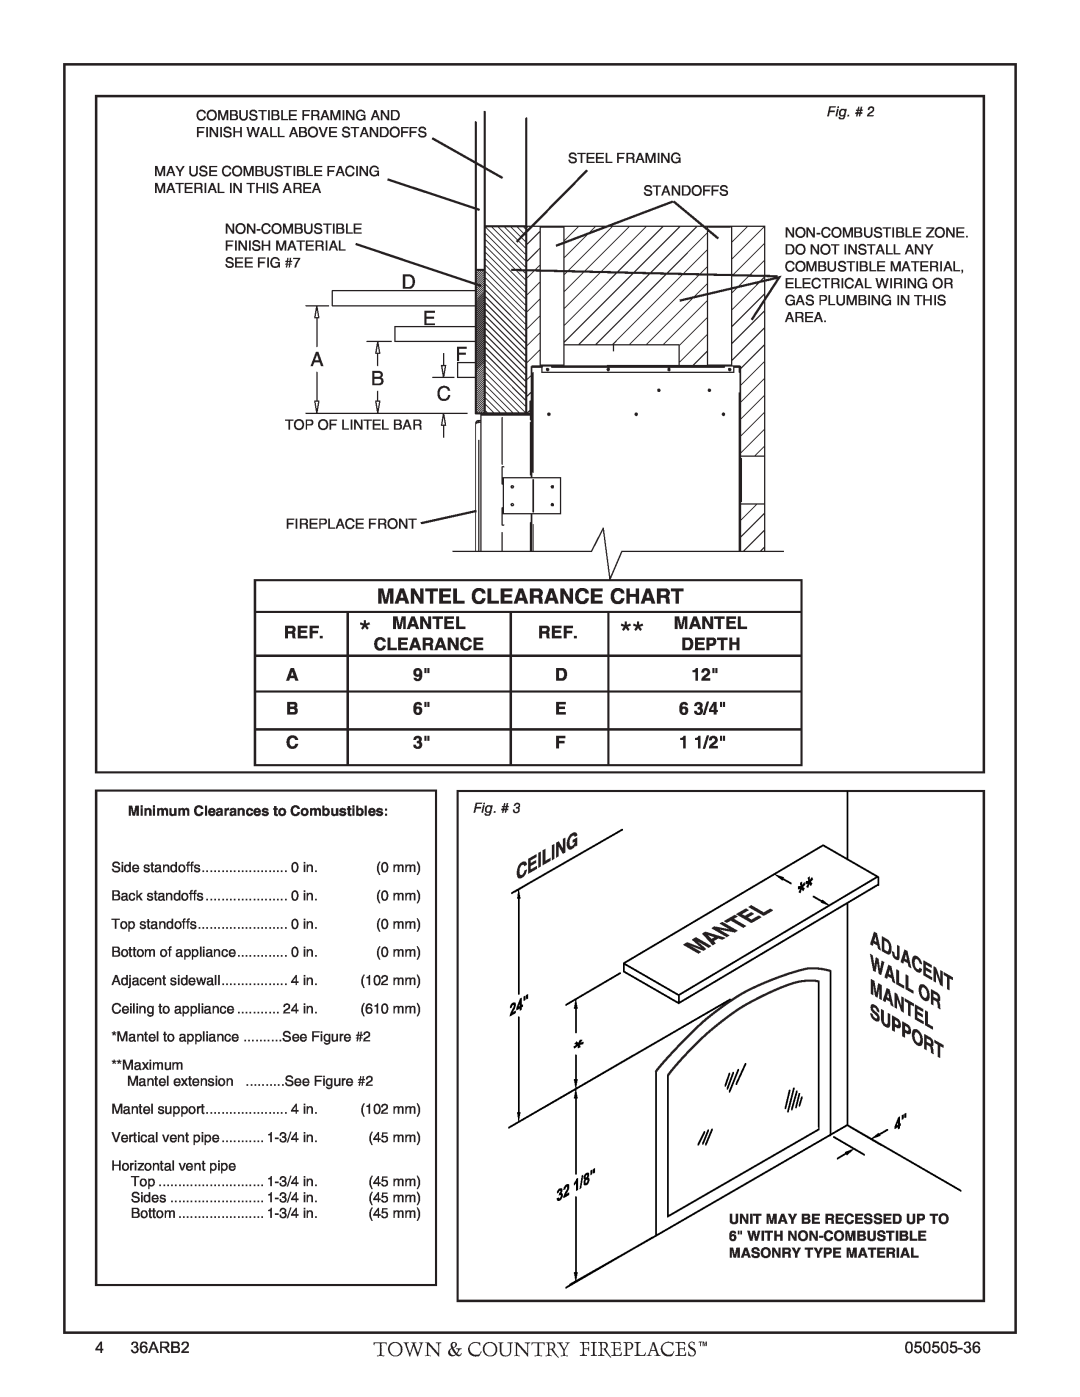 PGS TC36 AR manual D E Af B C, Wall Or, Mantel, Clearance, 63/4 1 1/2, Support 